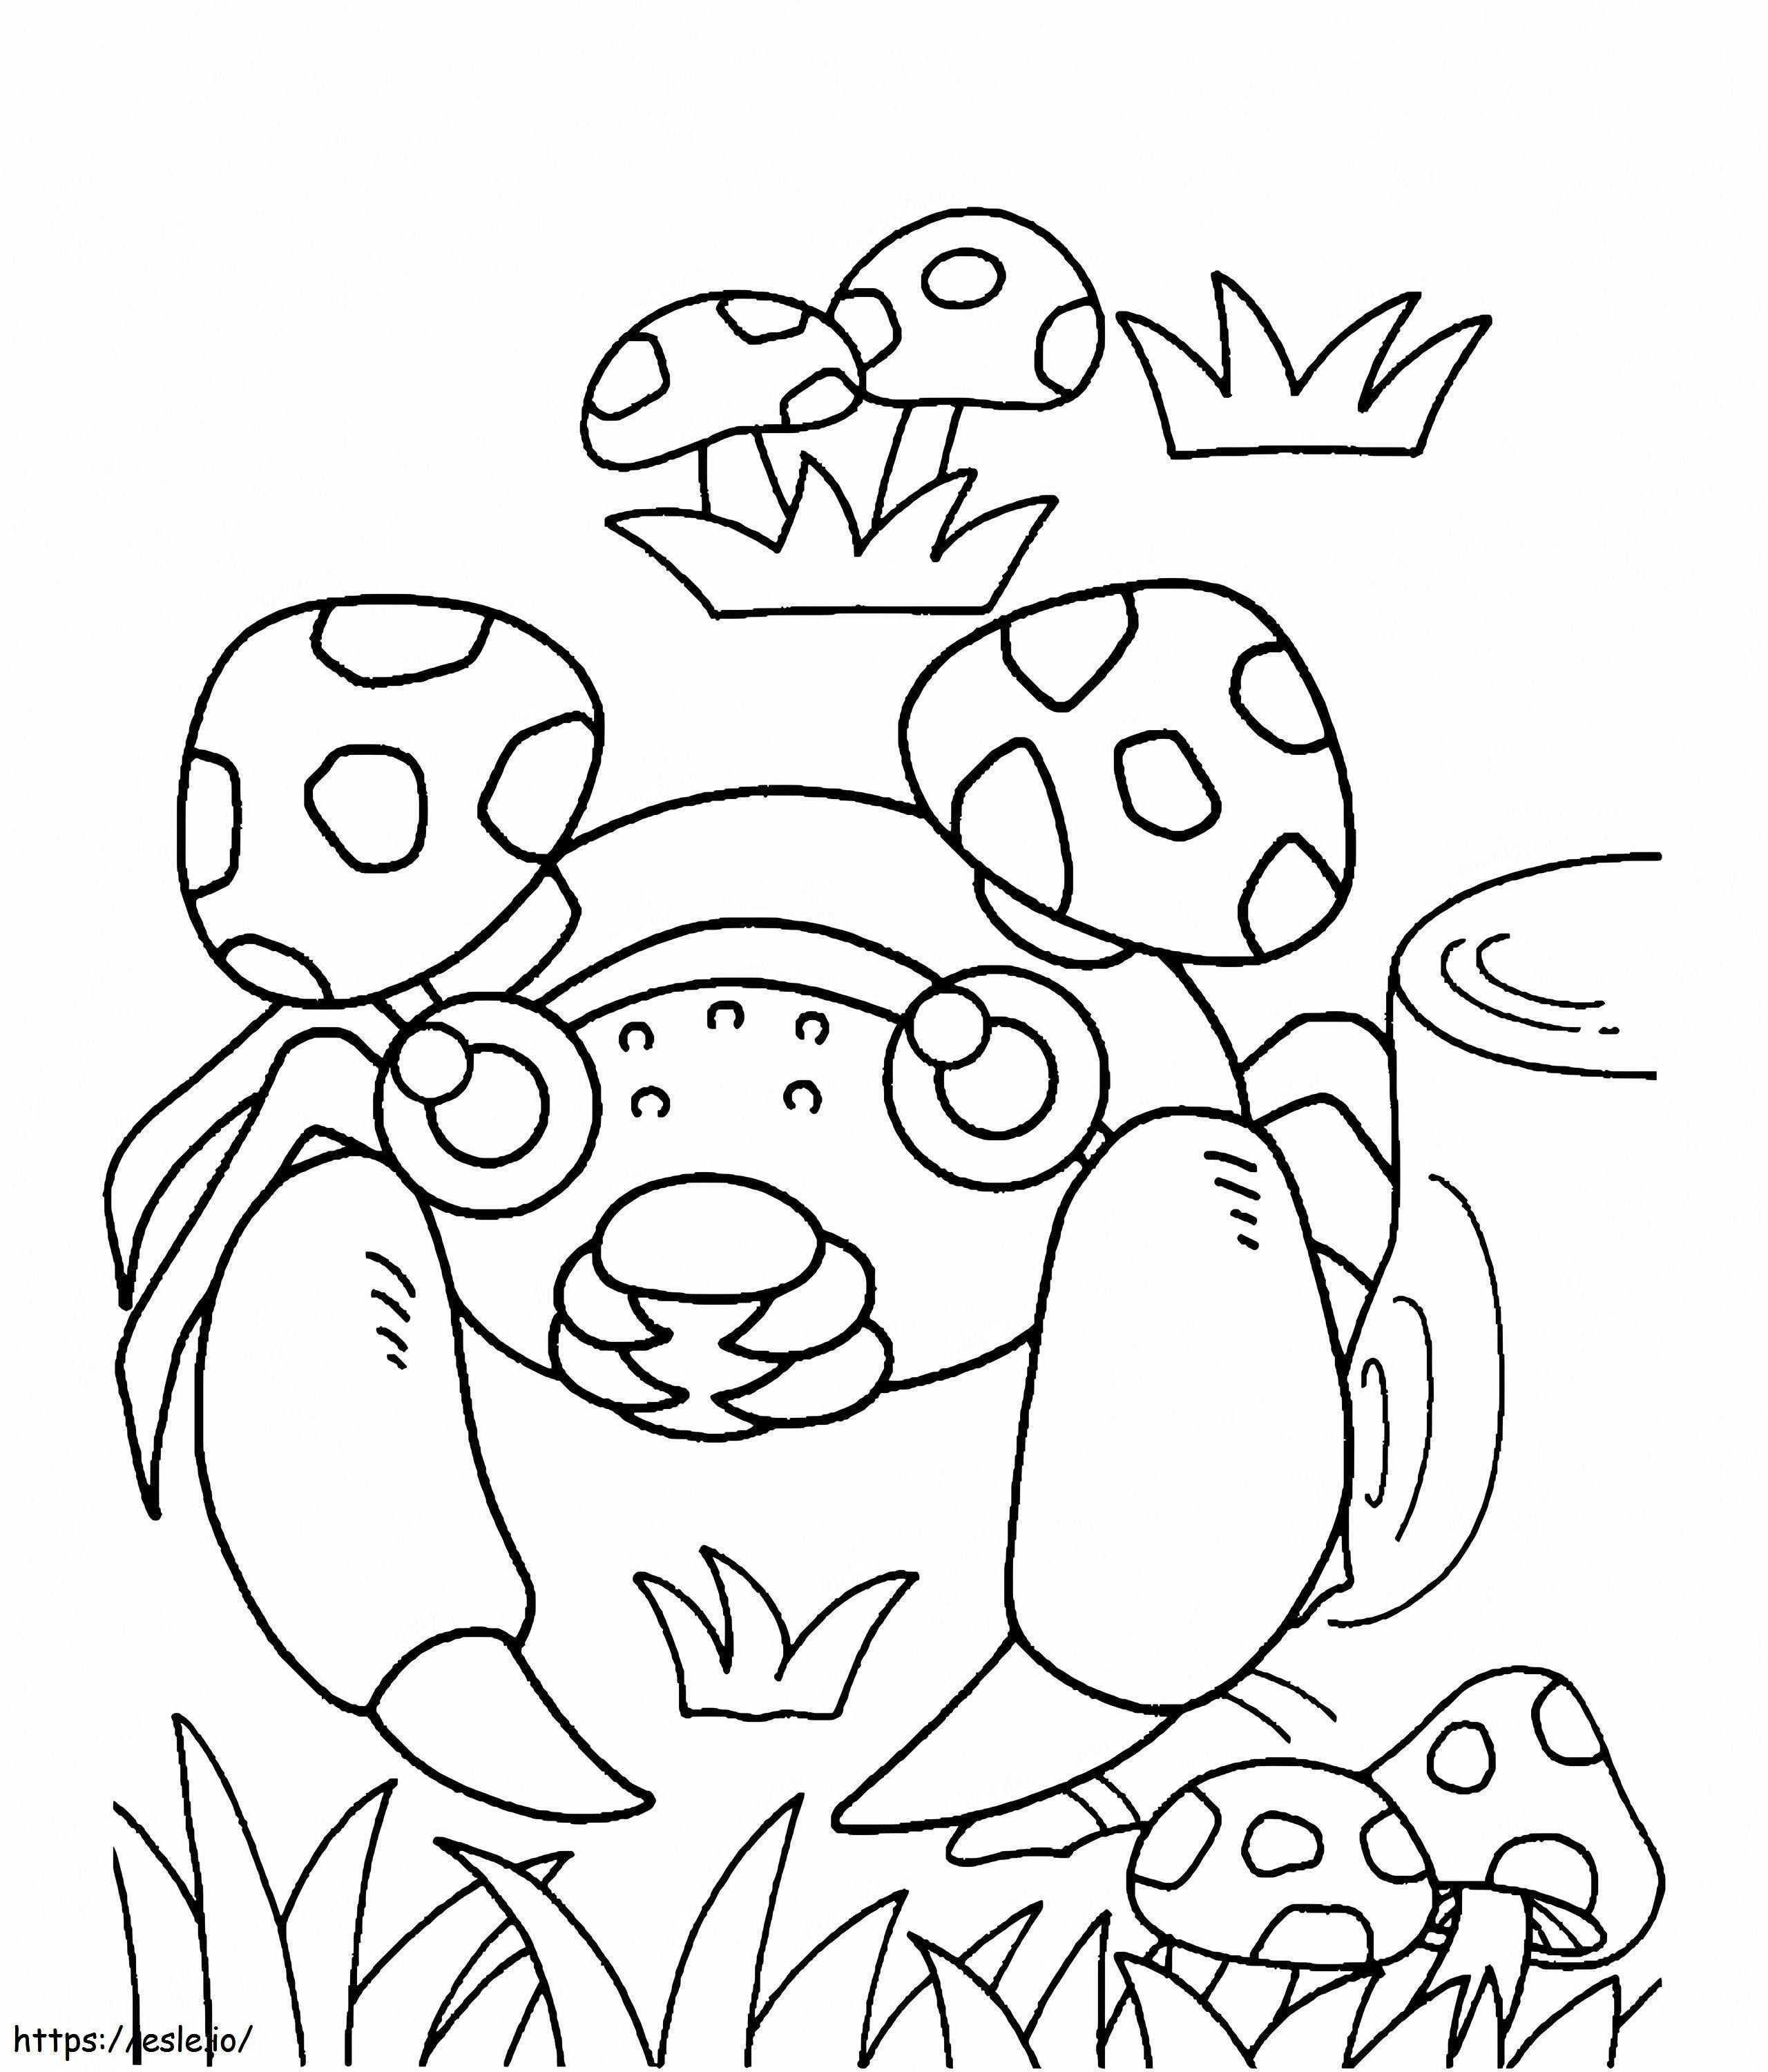 Best 4 coloring page